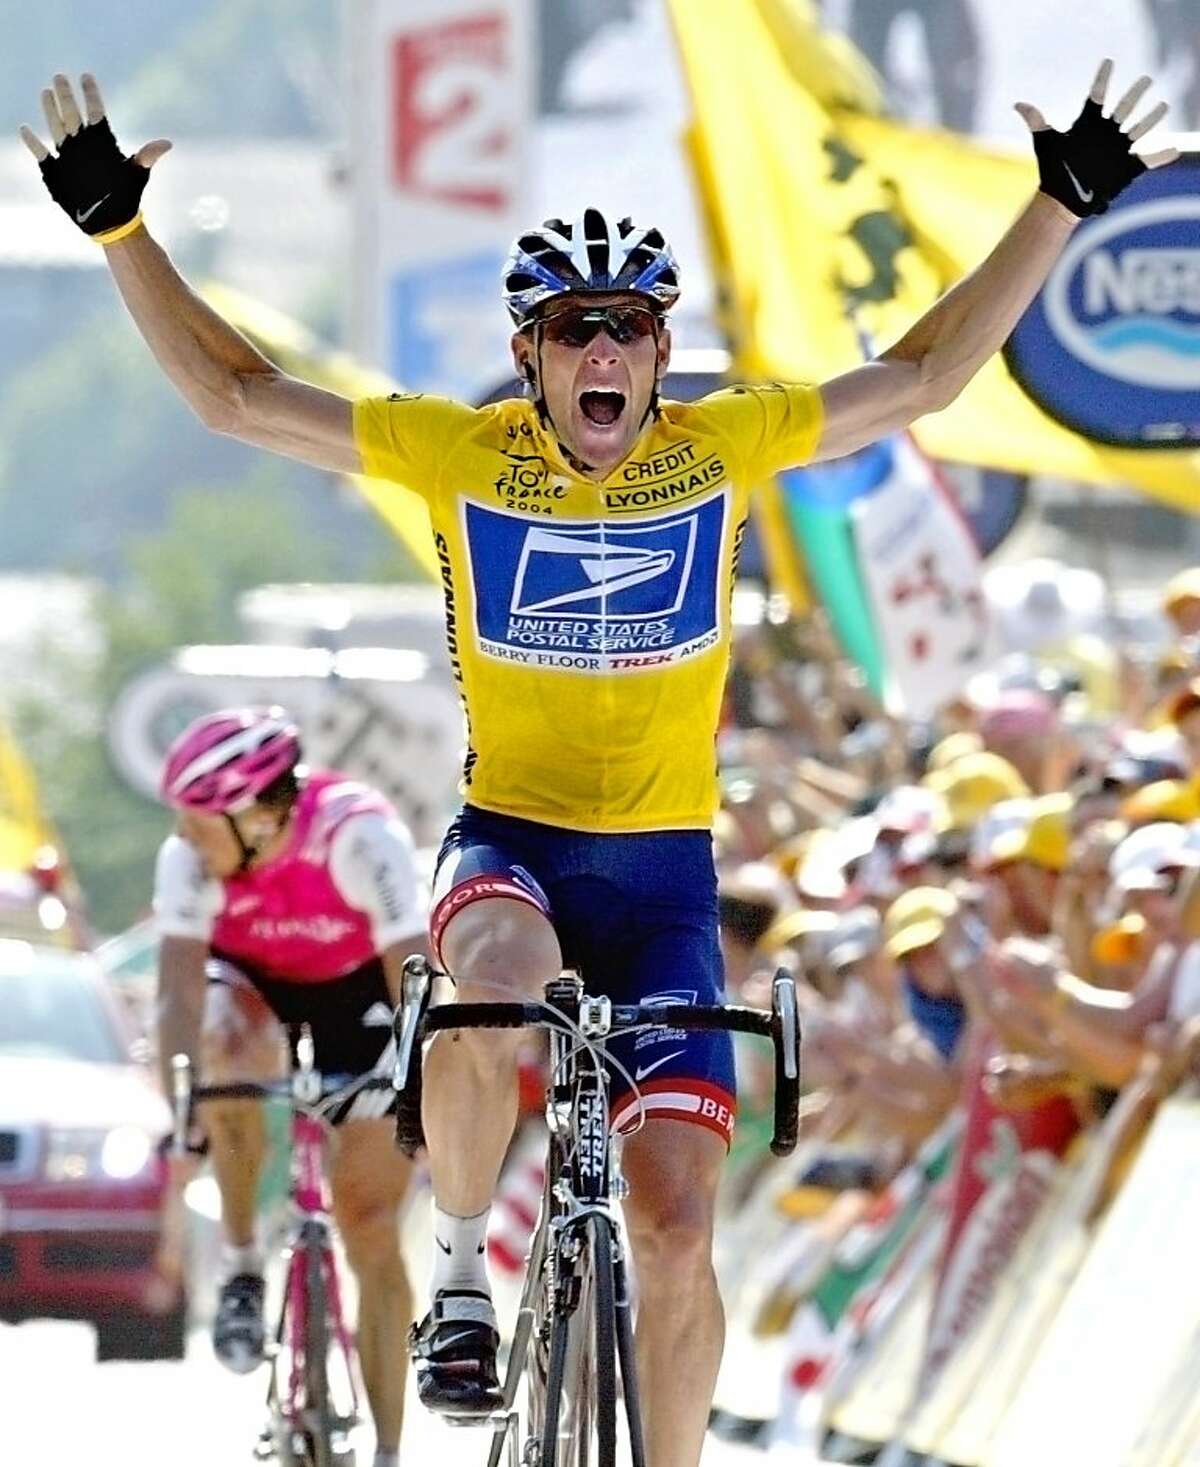 CORRECTS YEAR OF FILE PHOTO TO 2004, NOT, 2005 - FILE - In this July 22, 2004, file photo, overall leader Lance Armstrong reacts as he crosses the finish line to win the 17th stage of the Tour de France cycling race between Bourd-d'Oisans and Le Grand Bornand, French Alps. Federal prosecutors said, Friday, Feb. 3, 2012, they are closing a criminal investigation of Armstrong and will not charge him over allegations the seven-time Tour de France winner used performance-enhancing drugs. (AP Photo/Laurent Rebours, File)